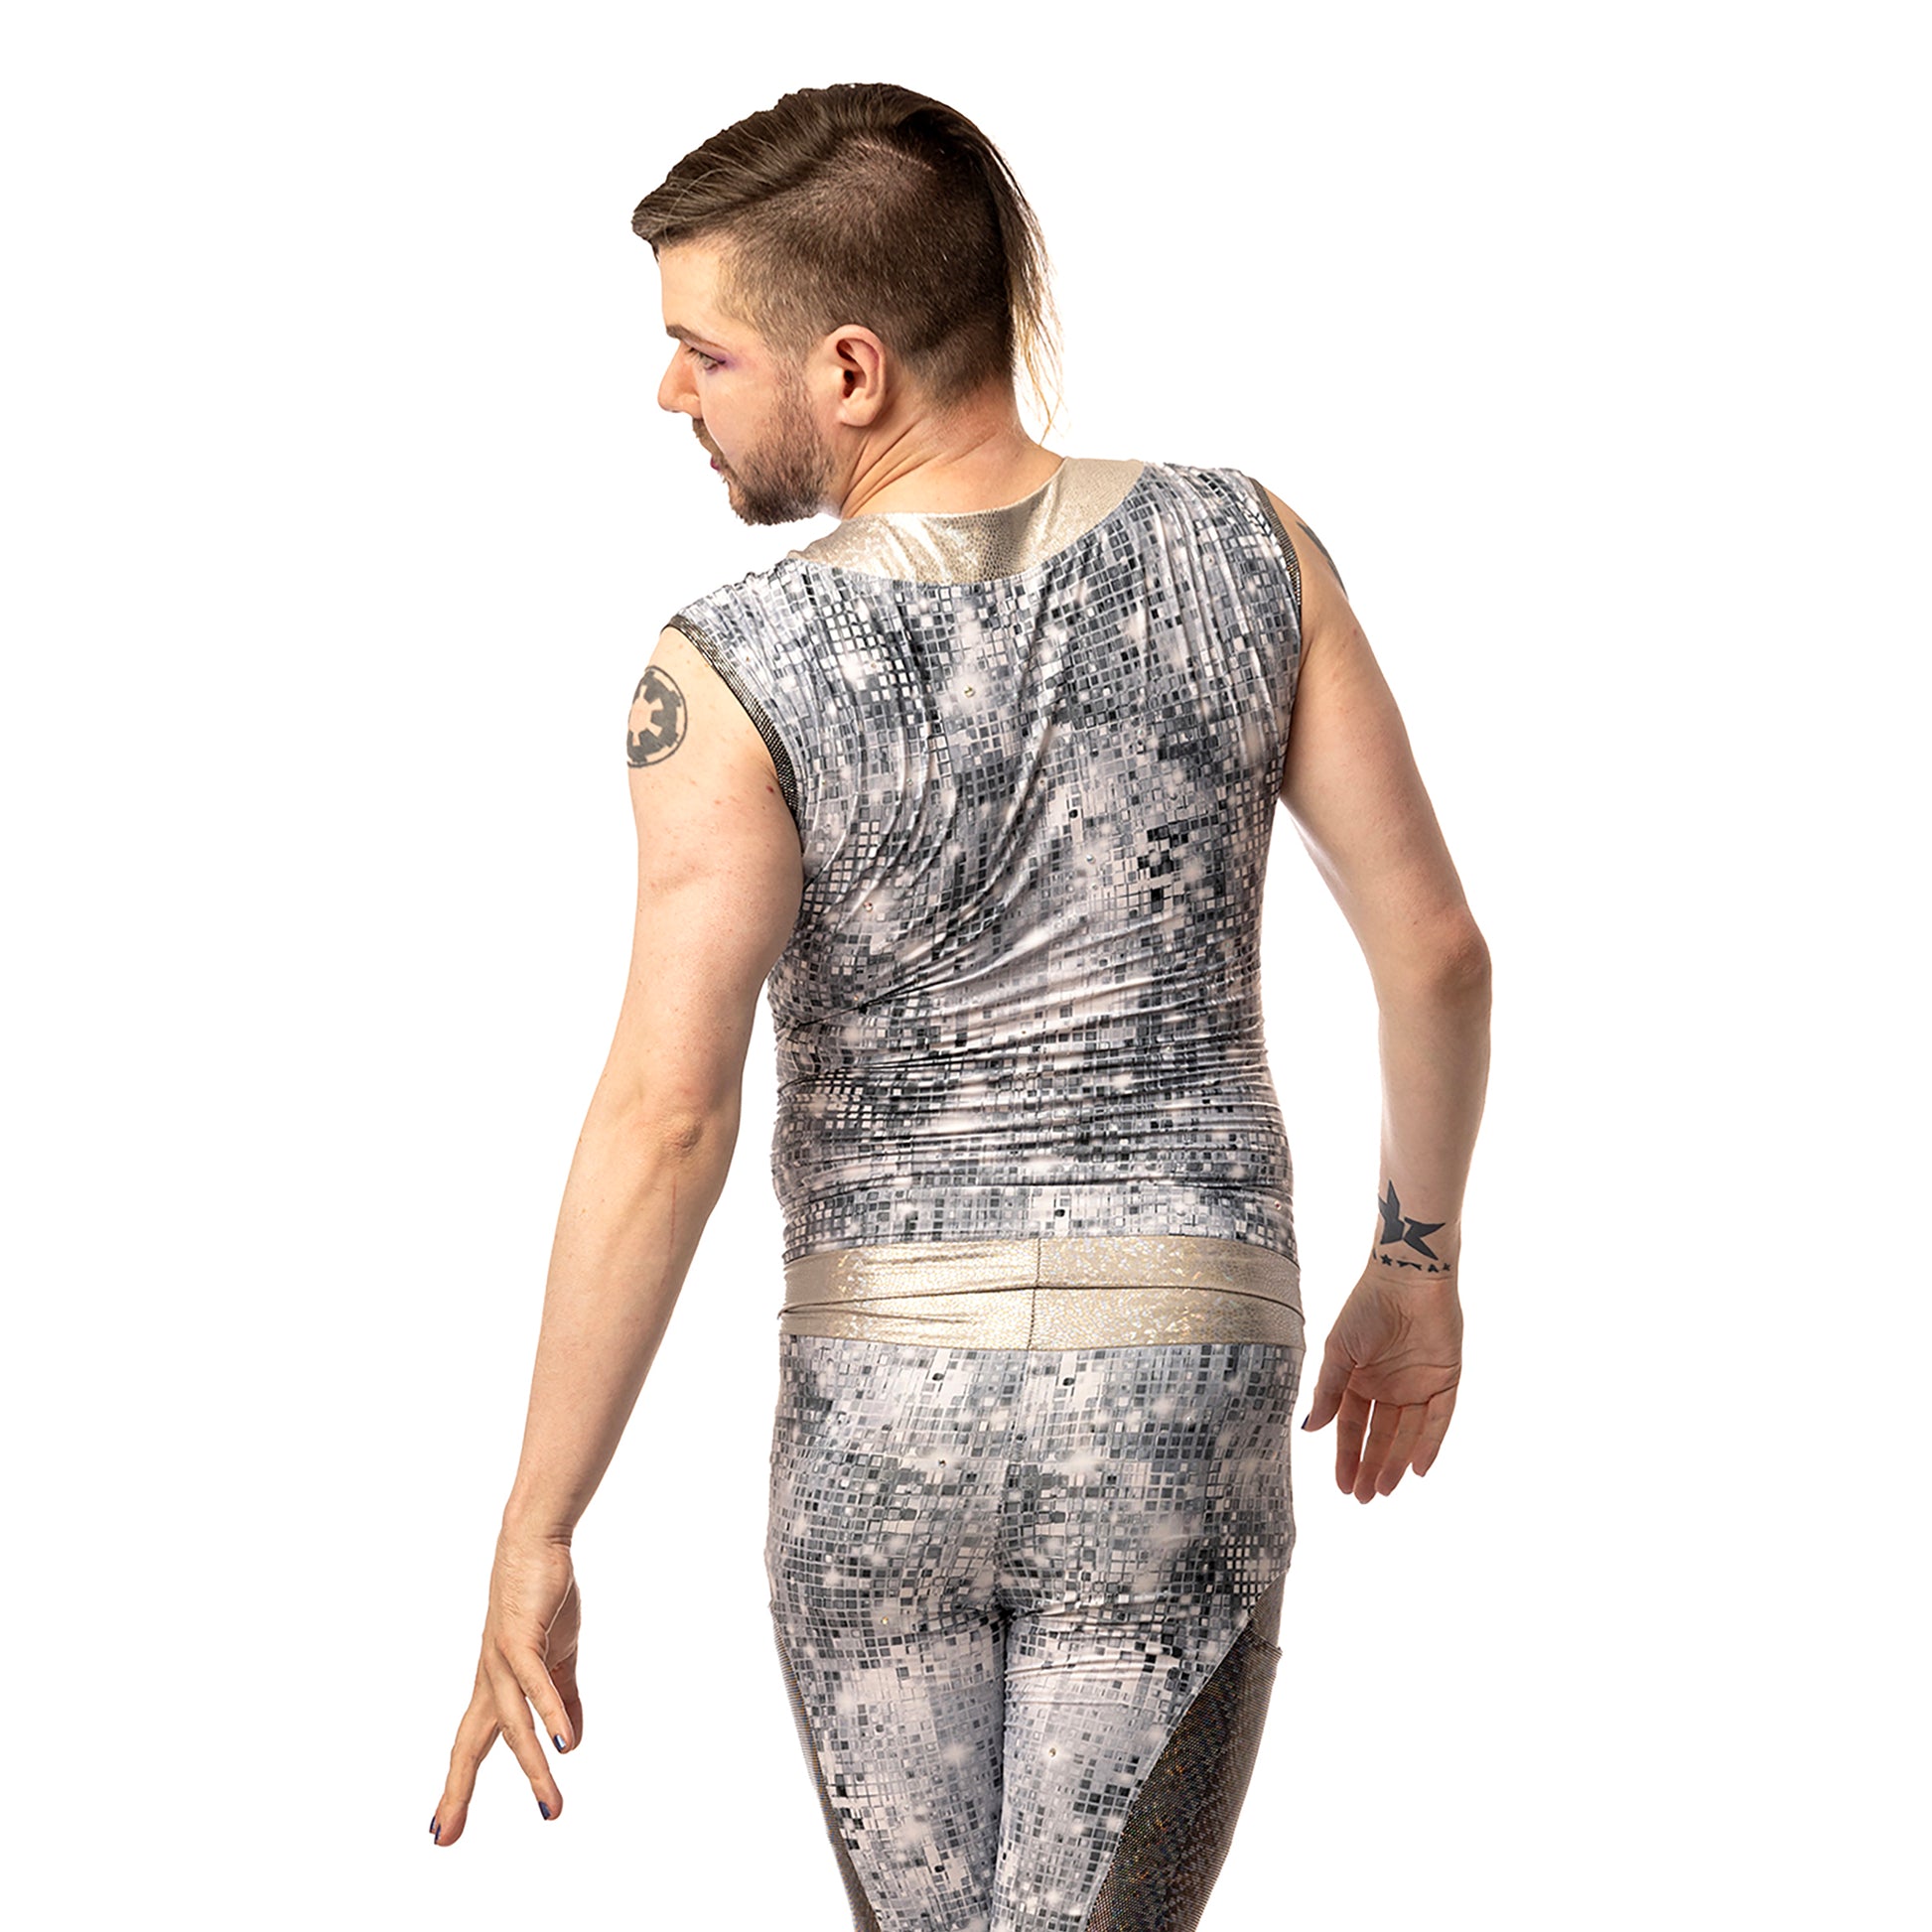 Disco Diva Leggings, a handmade-to-order piece in disco ball and silver foil print spandex. The leggings feature a double layer high waist with light silver knee panels and granite foil curved leg panels. Model Max stands with their back to the camera looking slightly over their shoulder. 